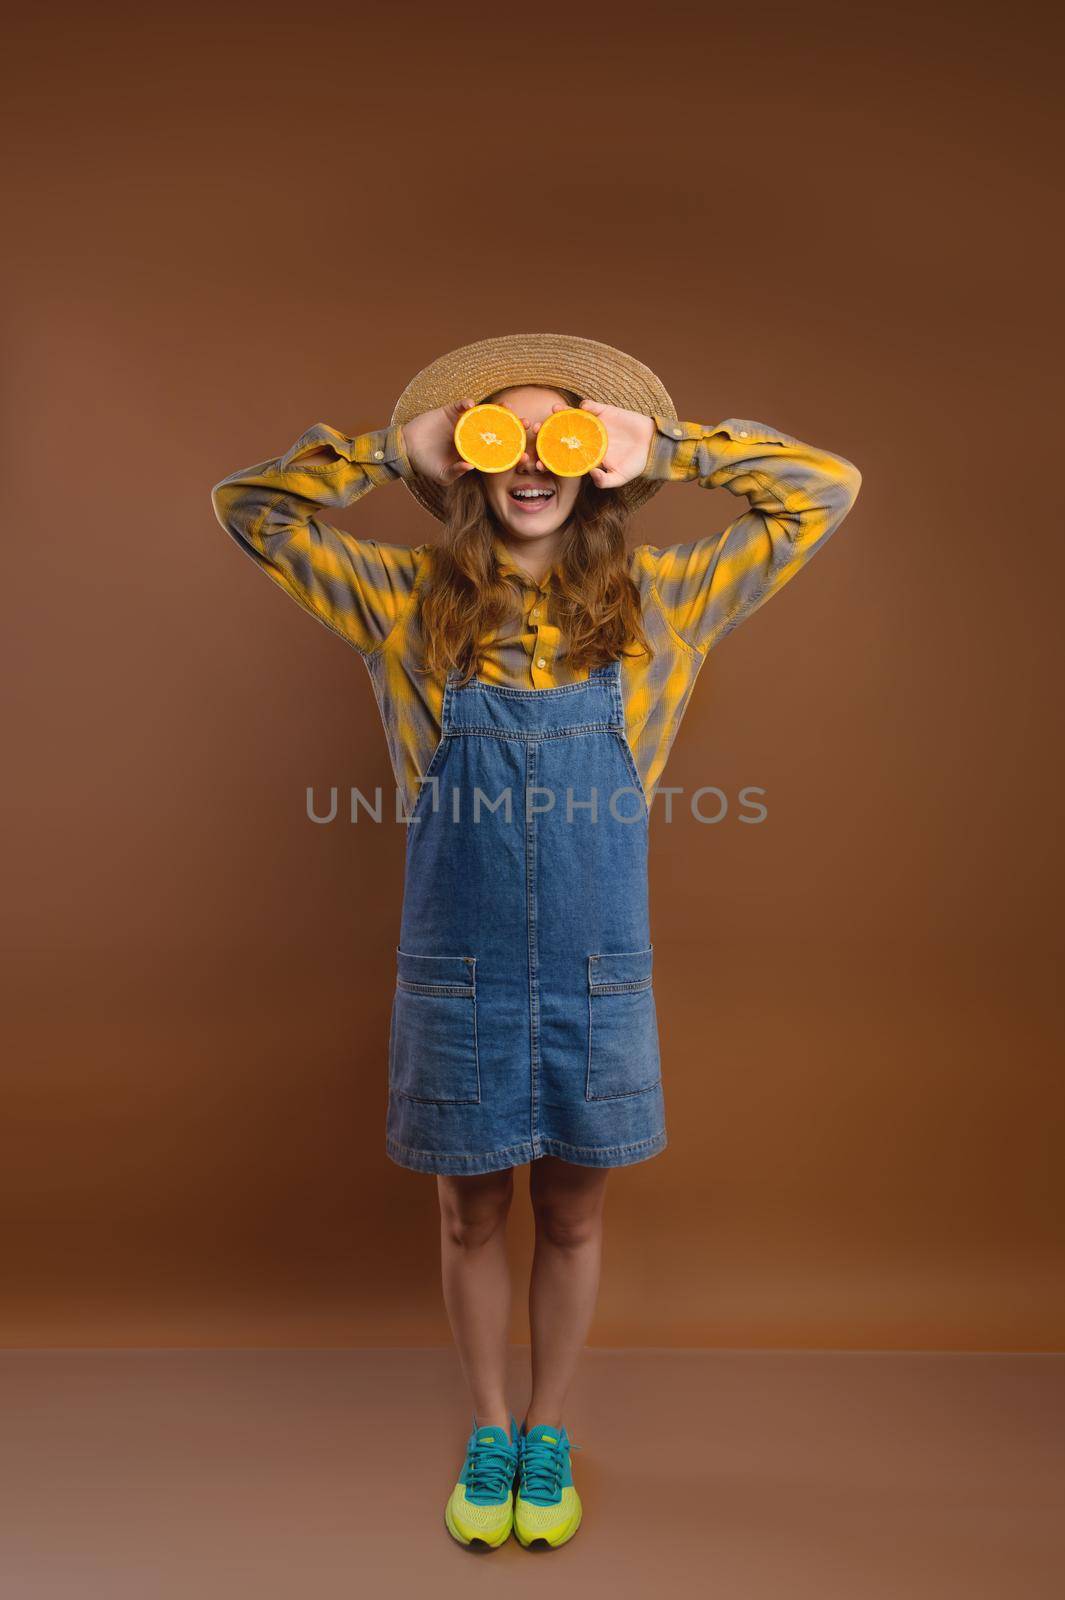 Studio portrait of a cheerful hipster woman going crazy making a funny face and covering her eyes with oranges.